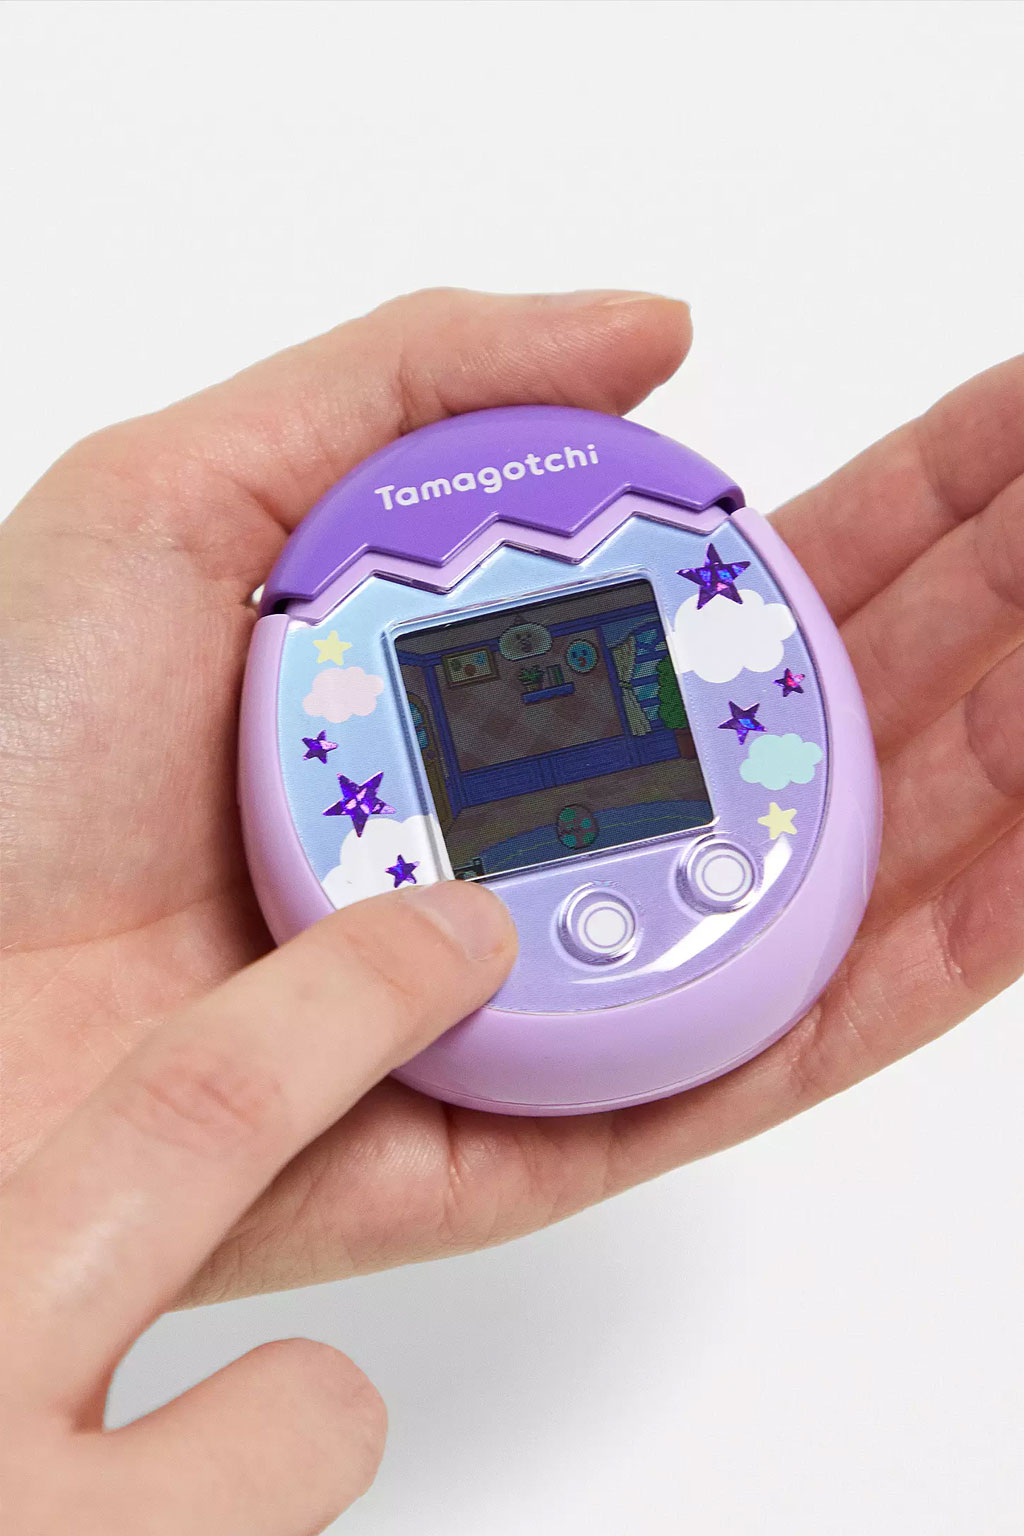 Purple Tamagotchi Pix in hand, Urban Outfitters